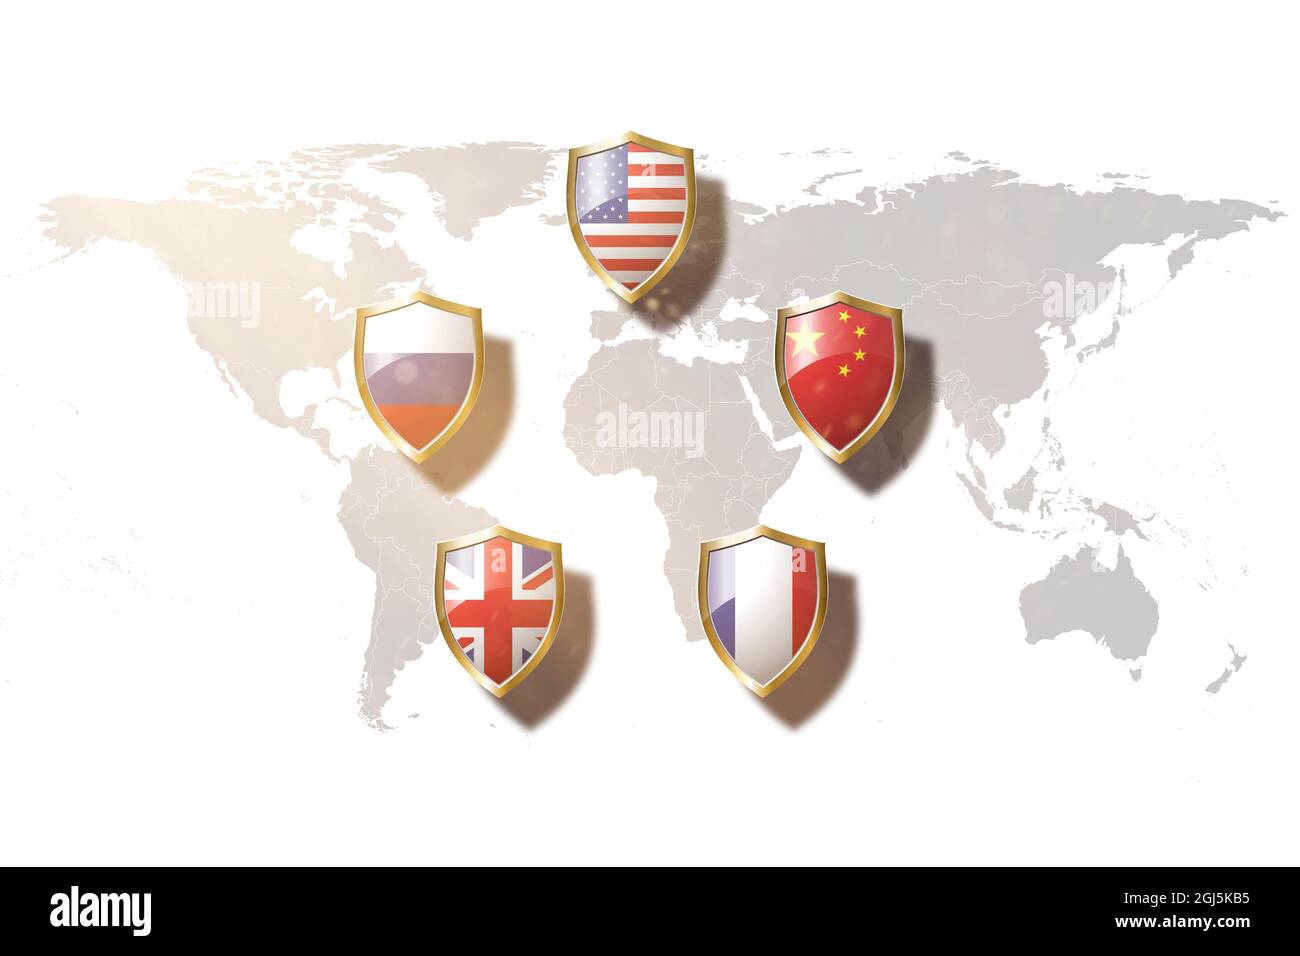 veto power countries flags in golden shield on world map background. Stock Photo